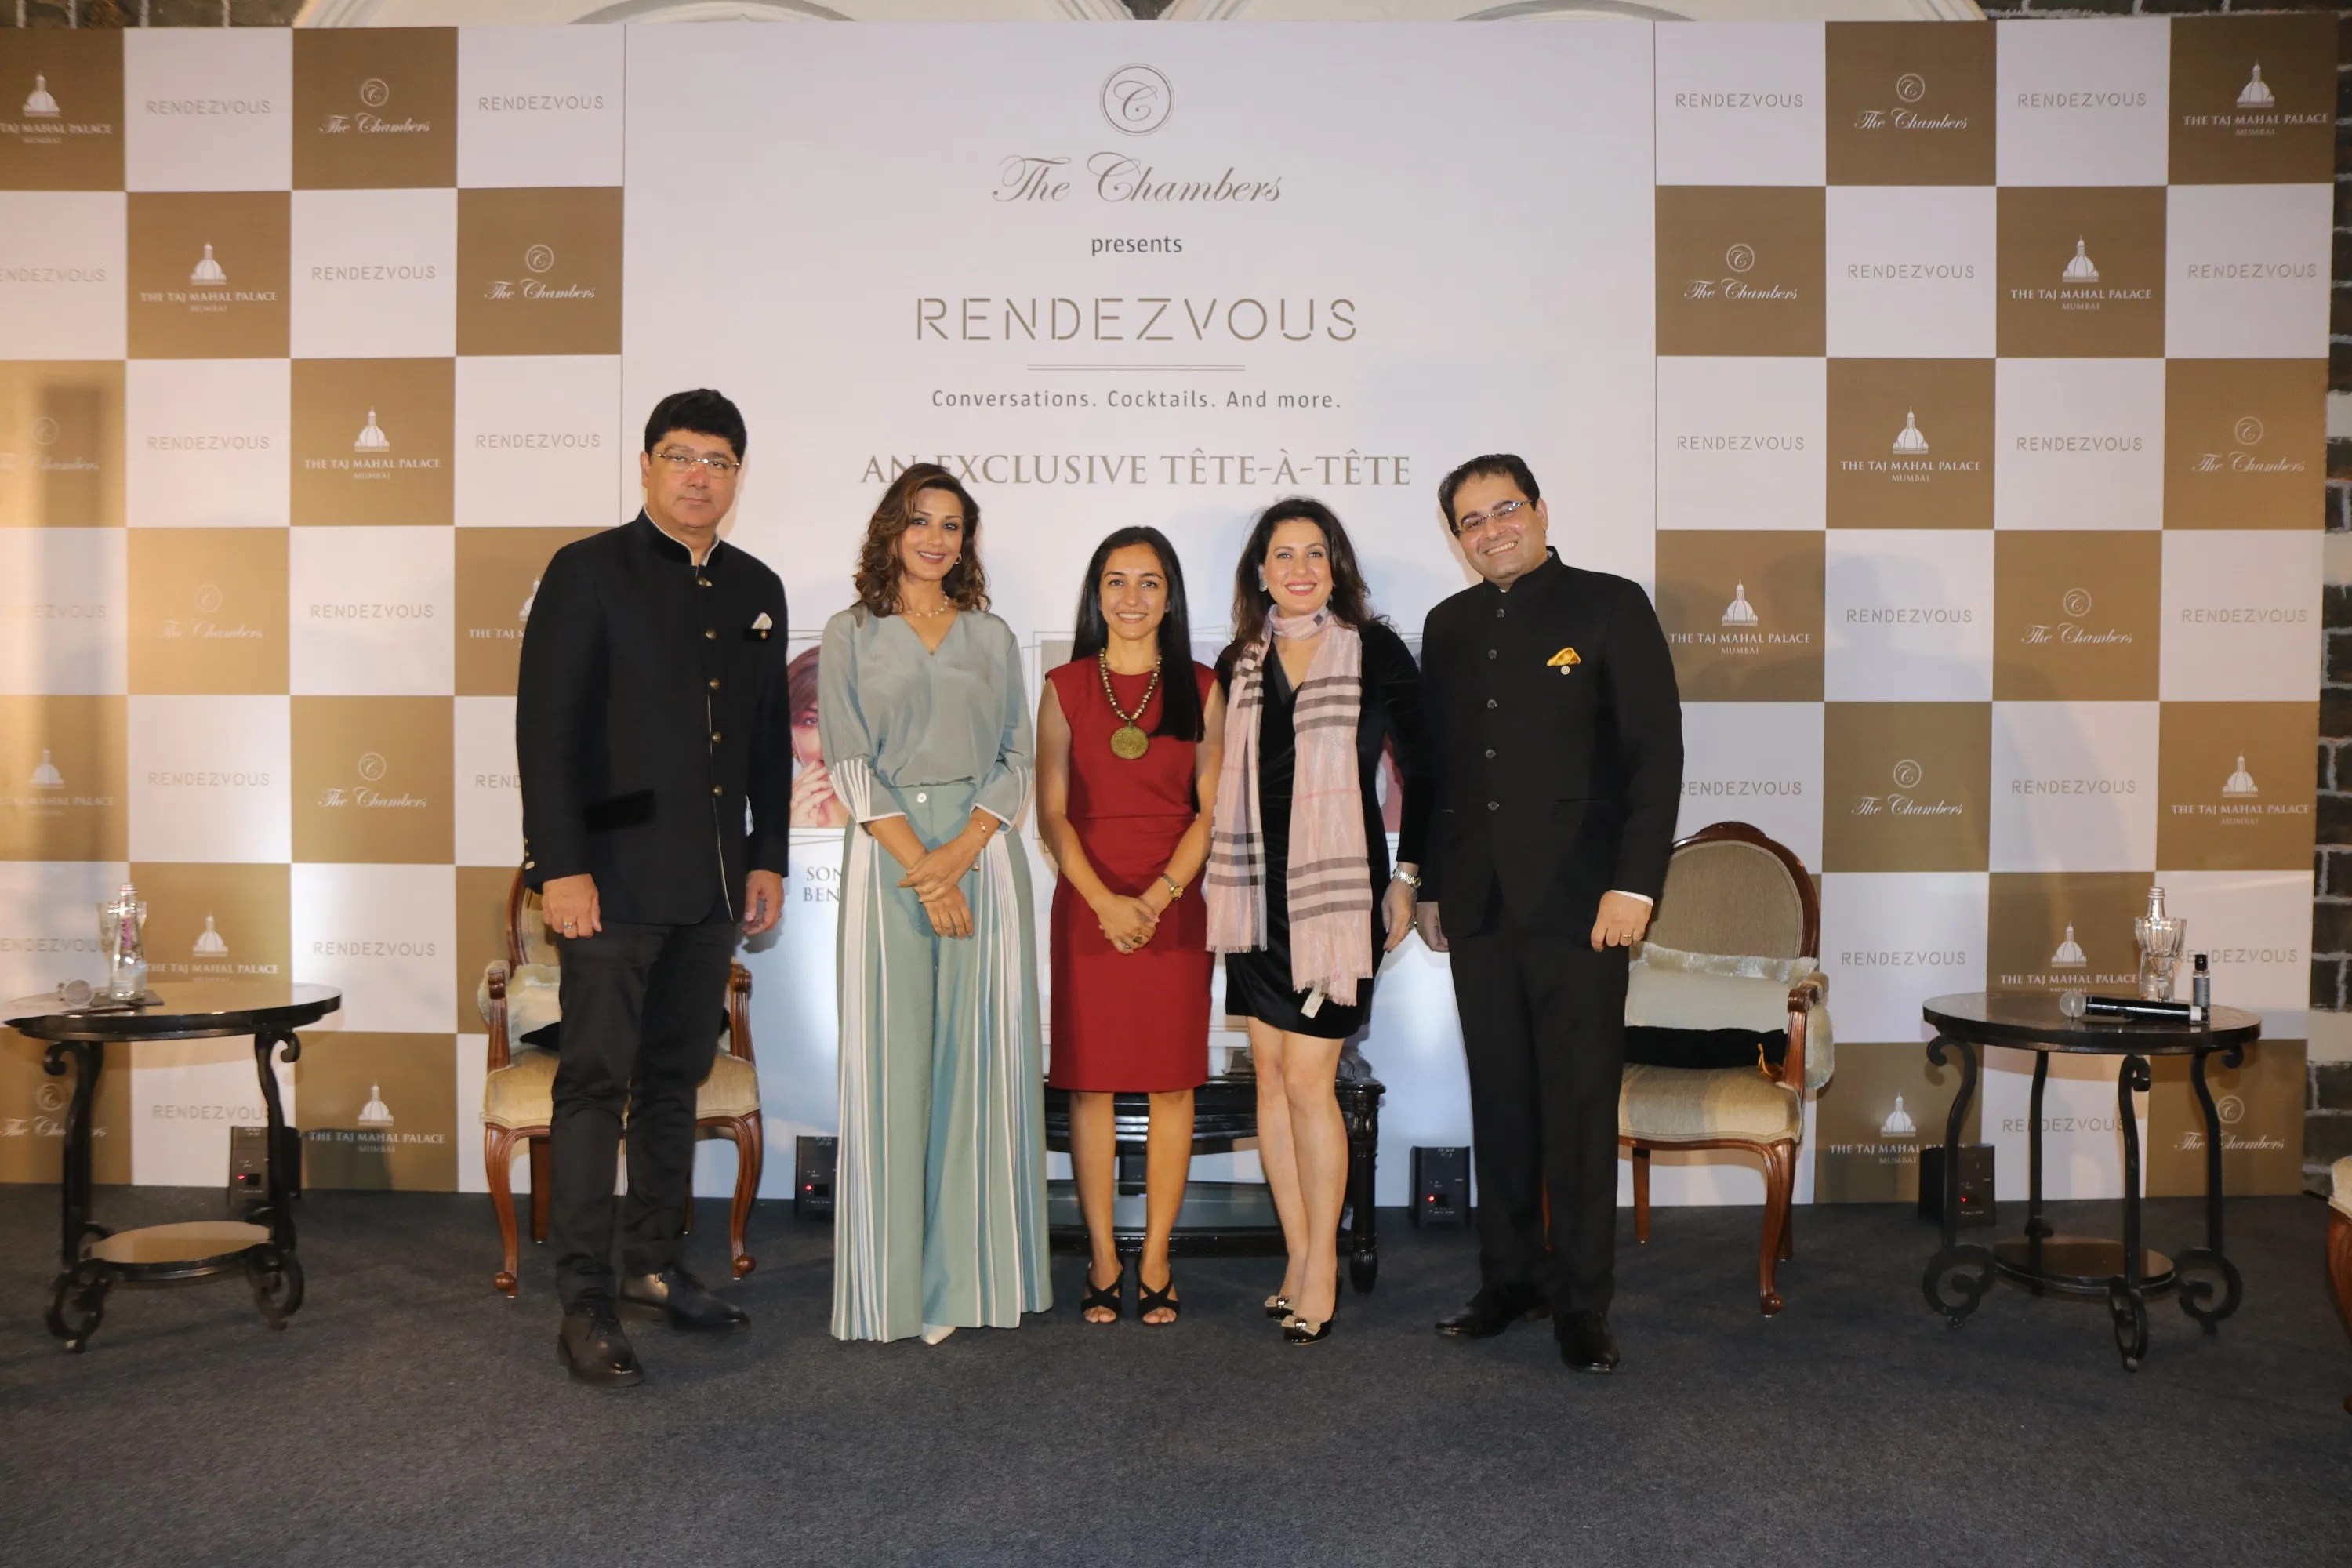 THE CHAMBERS 'RENDEZVOUS' HOSTS